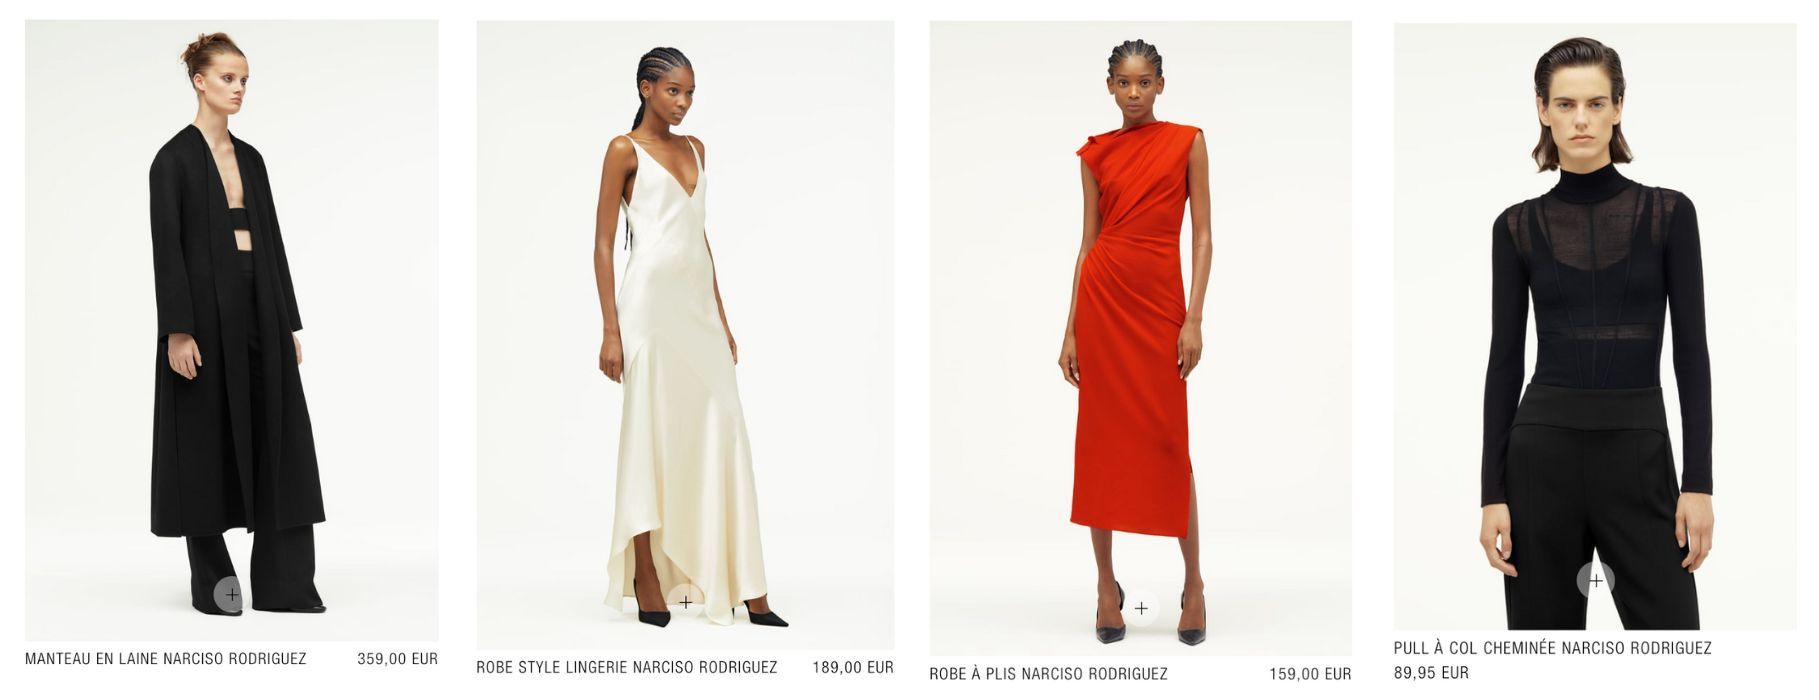 Some pieces from the 'Zara x Narciso Rodriguez collaboration